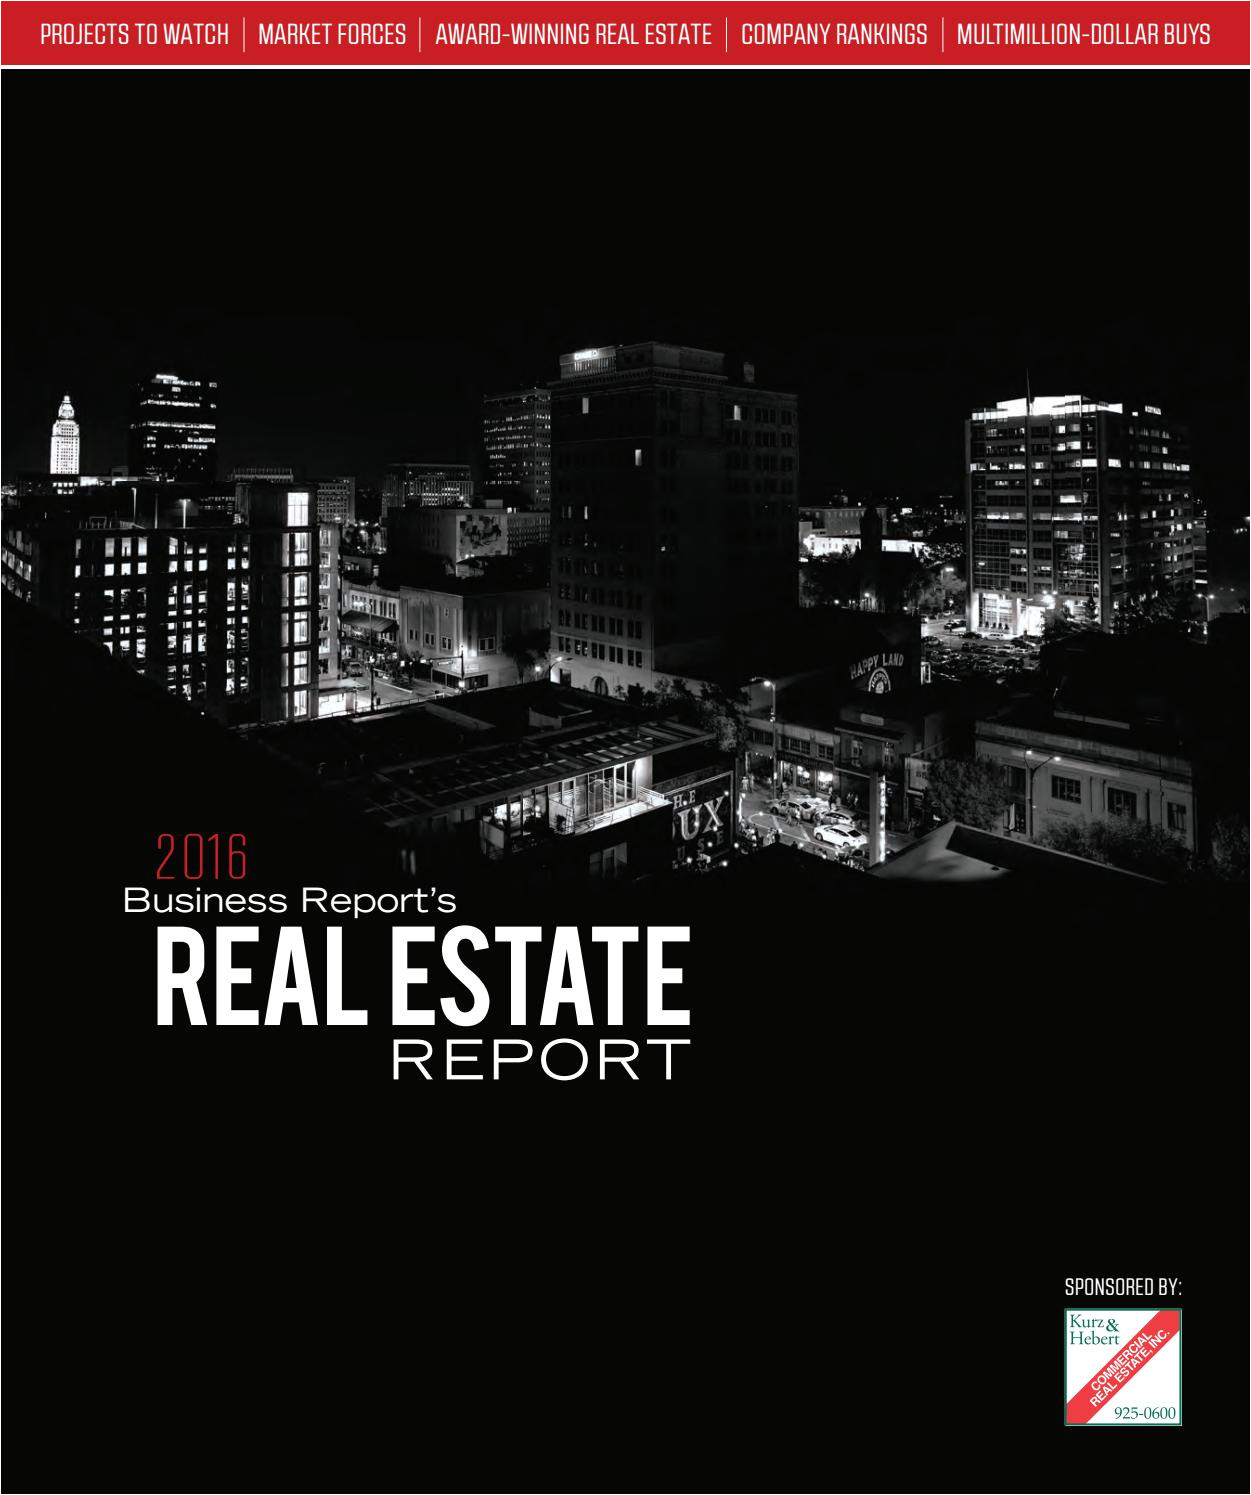 2016 baton rouge real estate report by baton rouge business report issuu